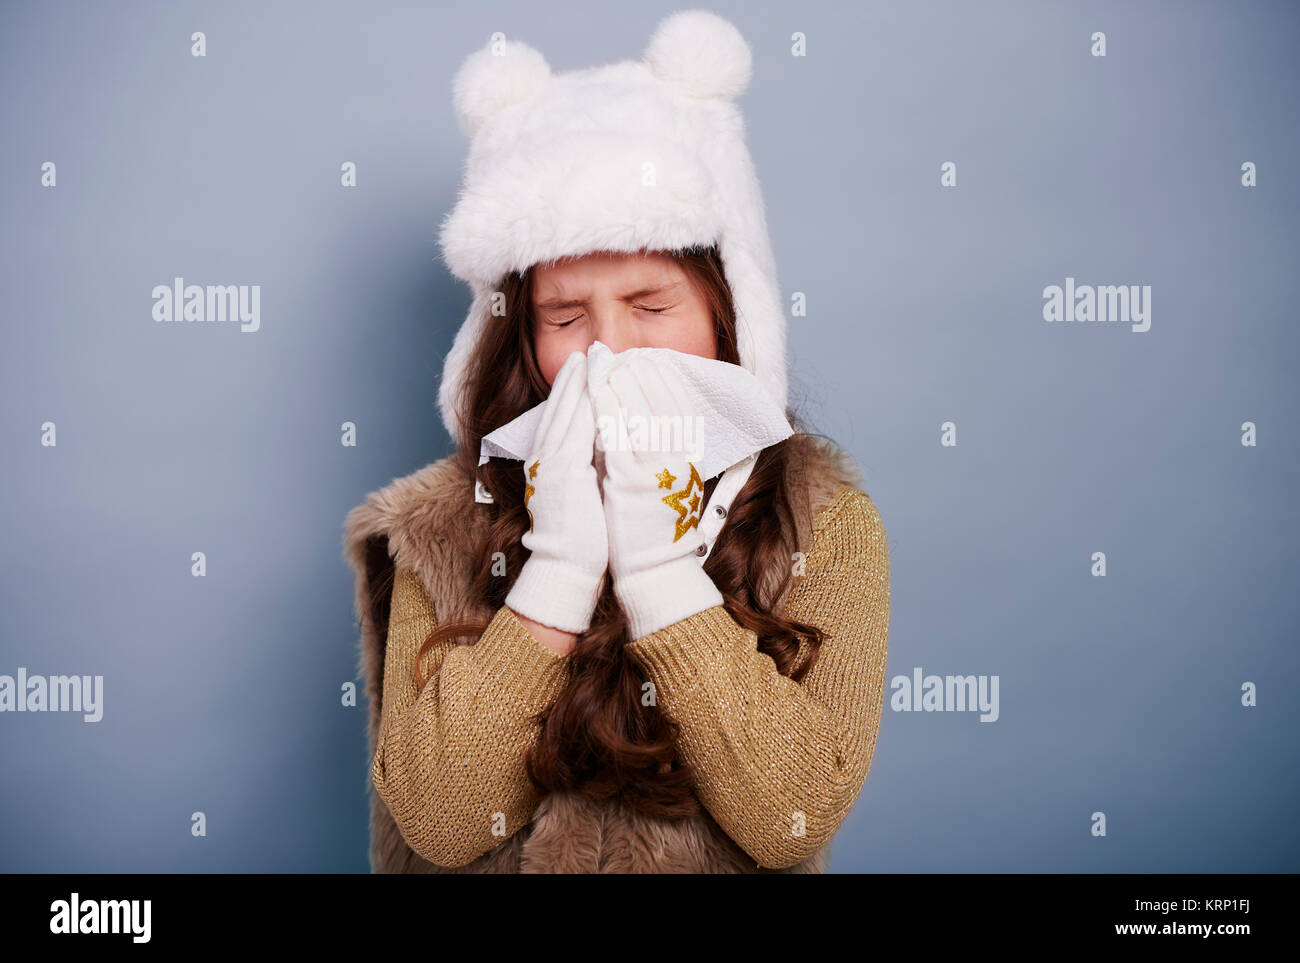 Unhealthy child blowing her nose Stock Photo